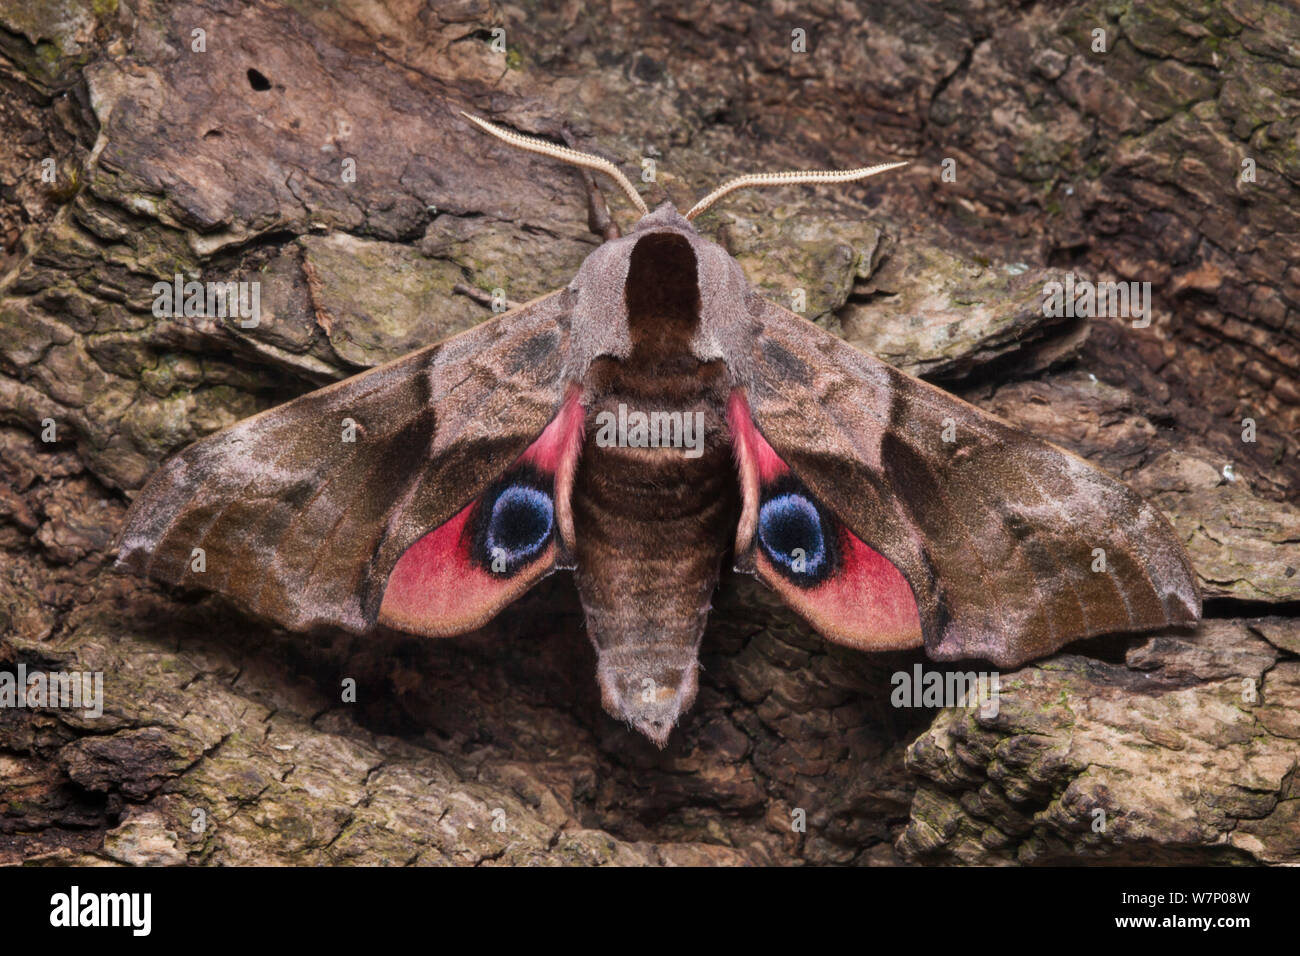 Eyed hawkmoth (Smerinthus ocellatus) showing eye spots on wings during deimatic display to deter predators, Surrey, UK. Sequence 2 of 2. Stock Photo